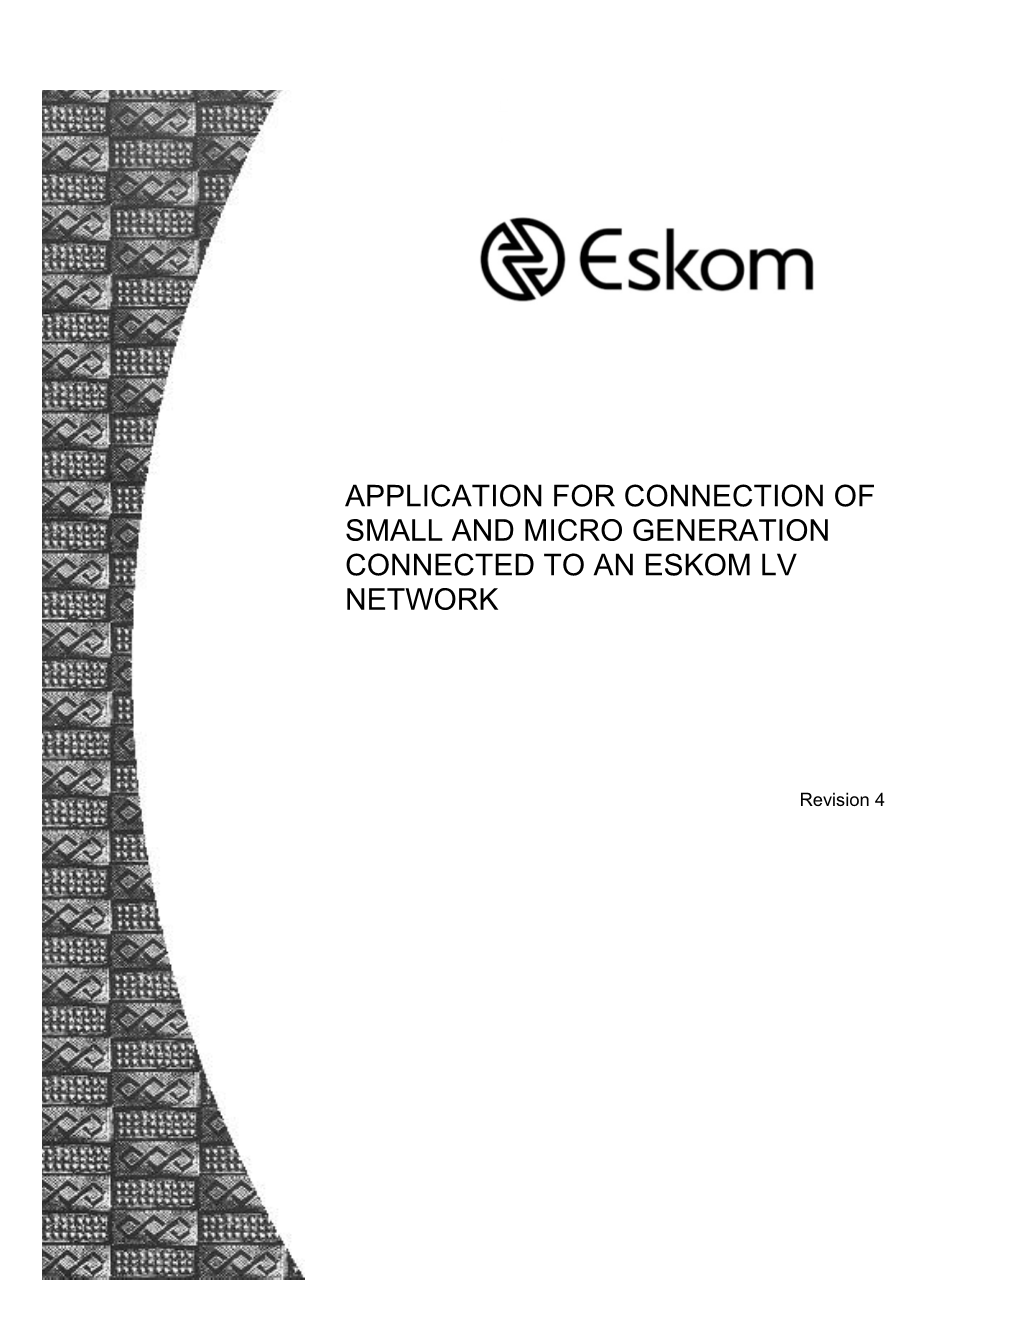 Application for Connection of Small and Micro Generation Connected to an Eskom Lv Network